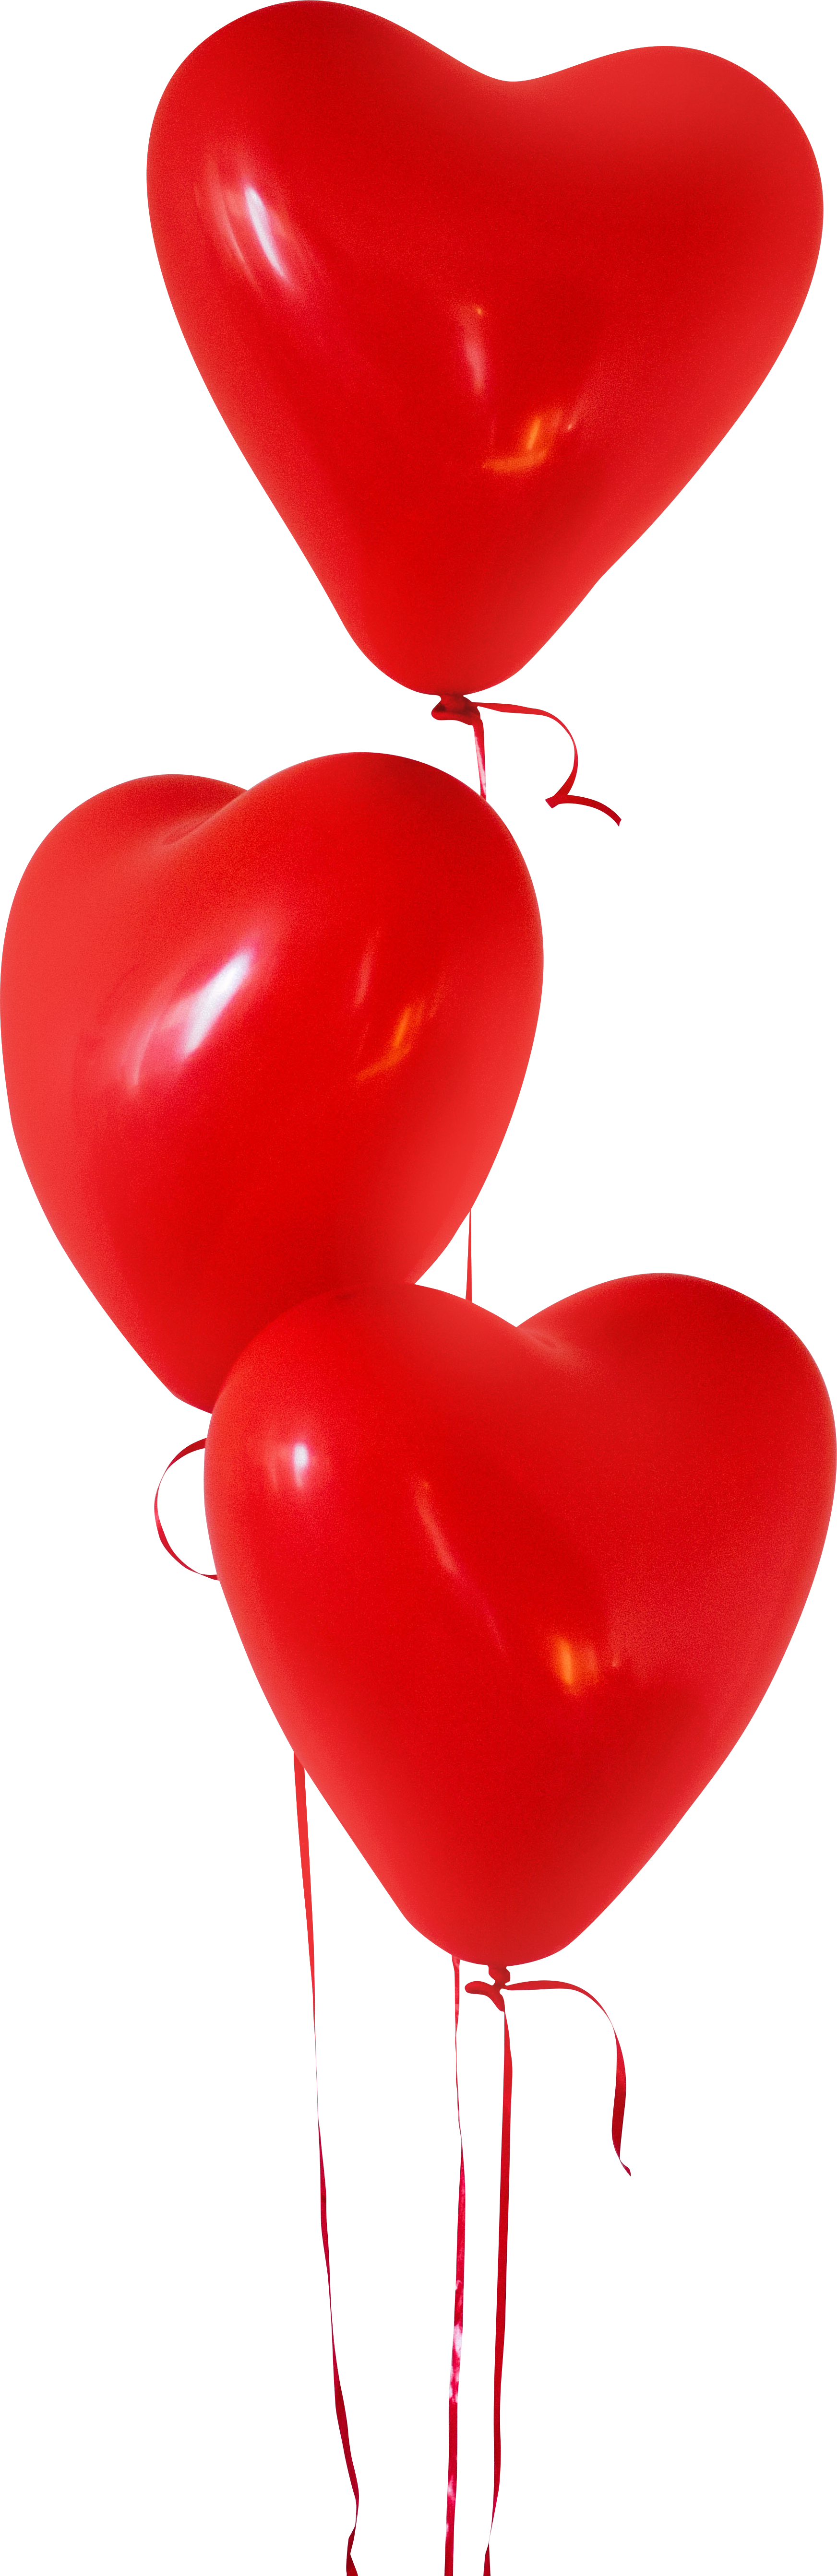 Coeur ballons rouges libres image PNG